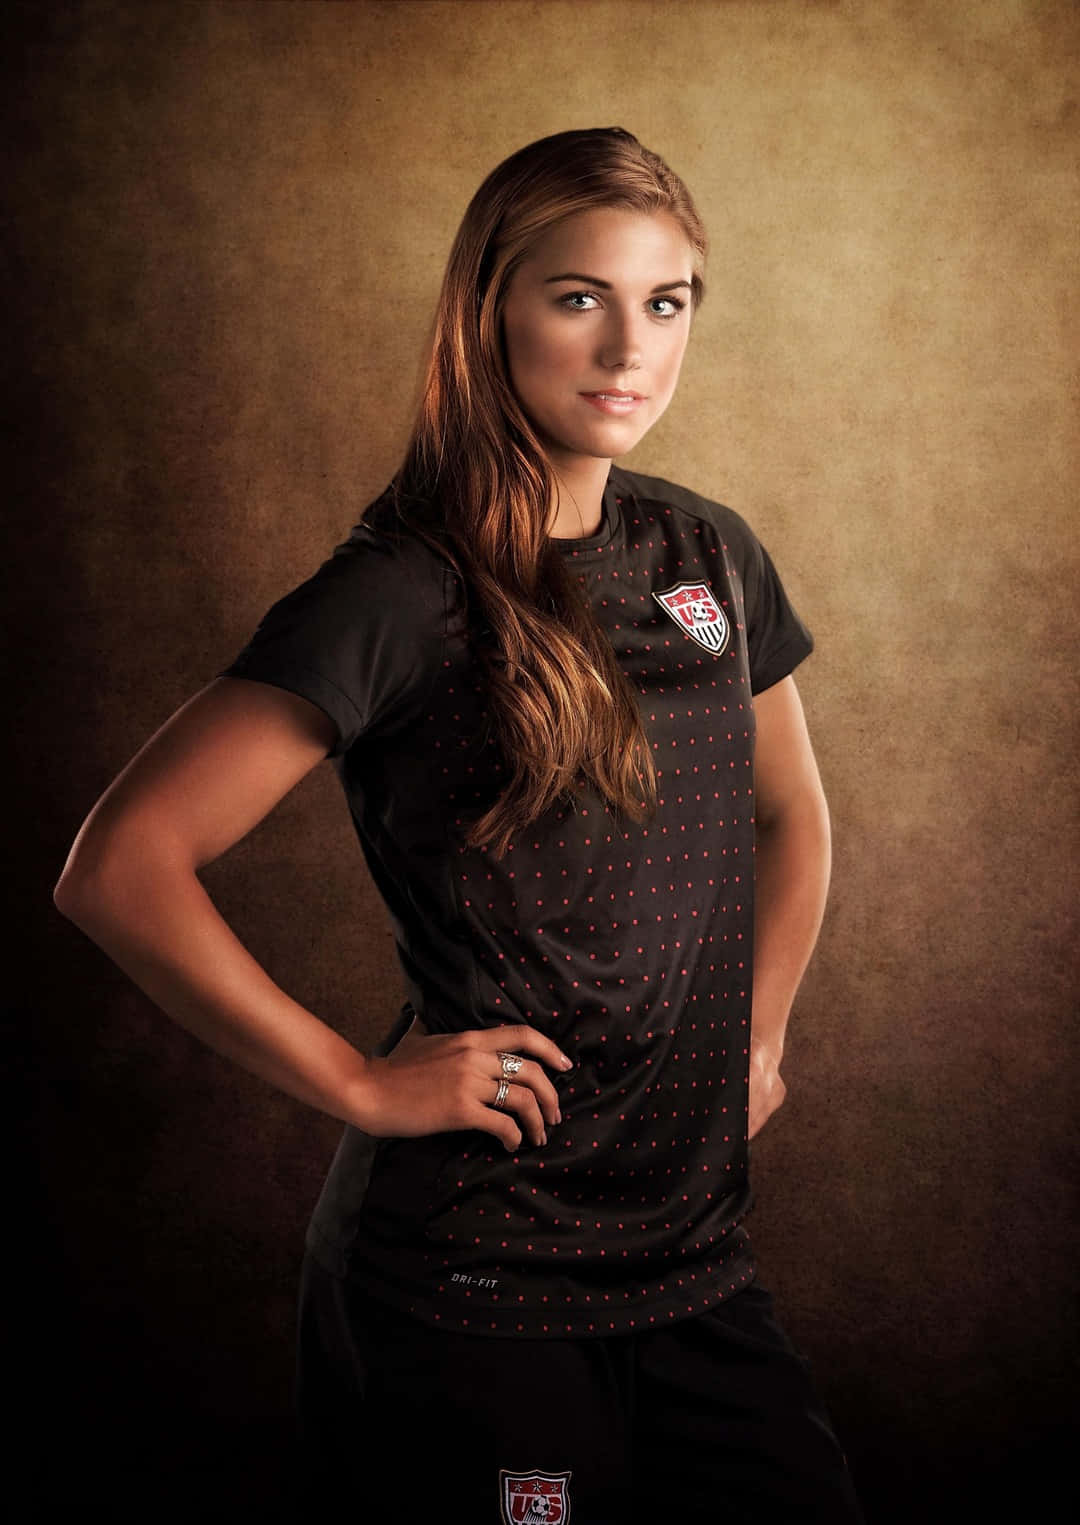 USWNT/ Alex Morgan, kicking off the game with a baller degree of finesse.